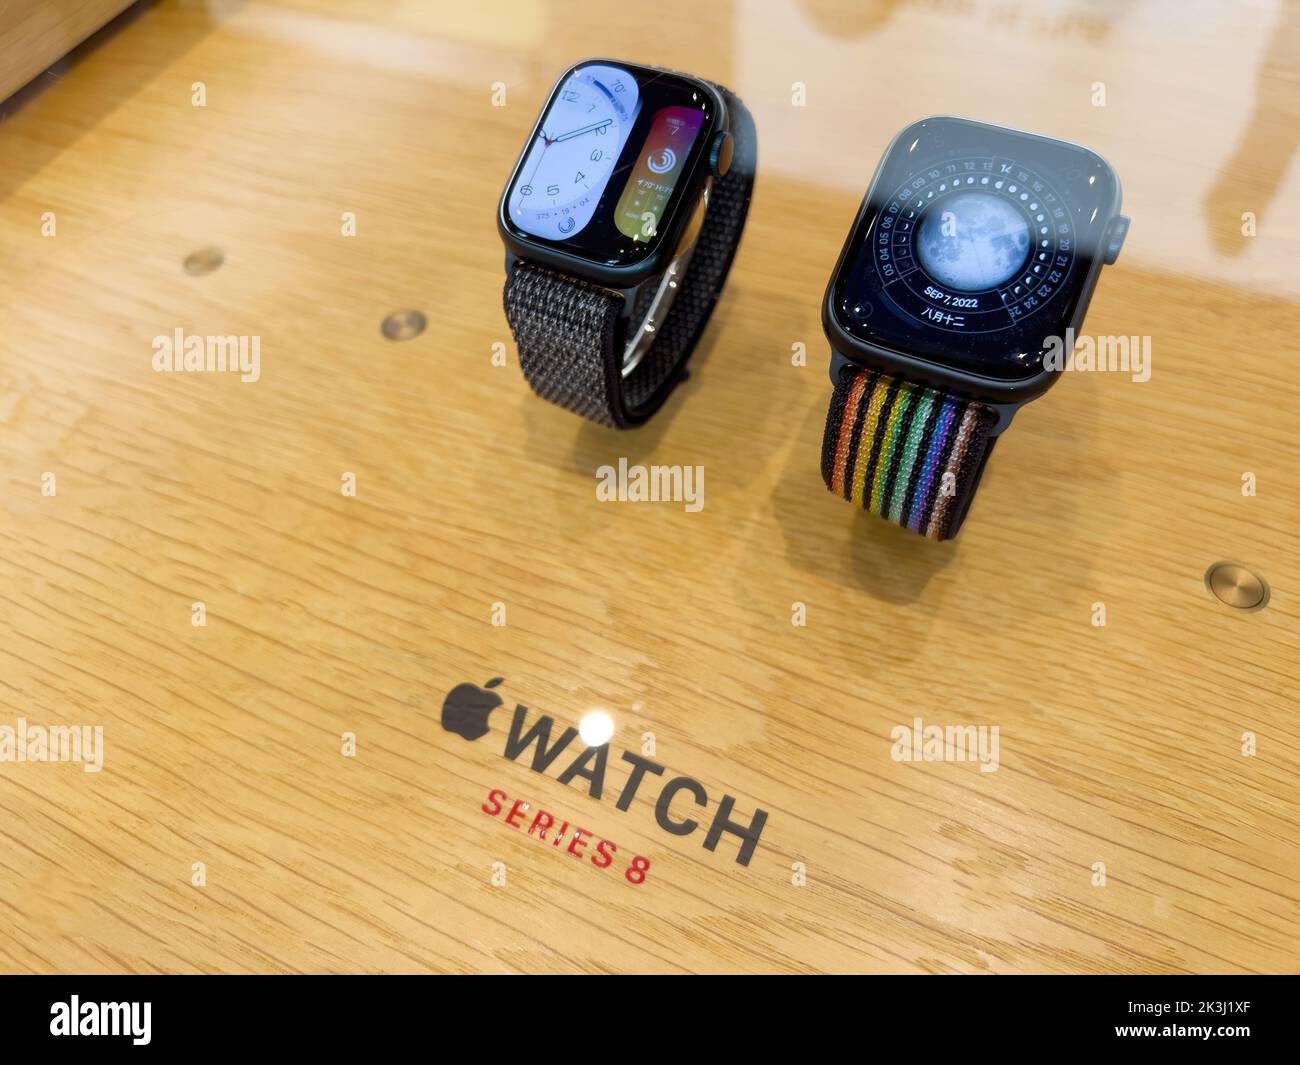 Paris, France - Sep 16, 2022: Apple store featuring new Apple Watch series 8 with features: Cycle Tracking and Crash Detection two new temperature sensors, a high-g accelerometer, improved gyroscope. Stock Photo